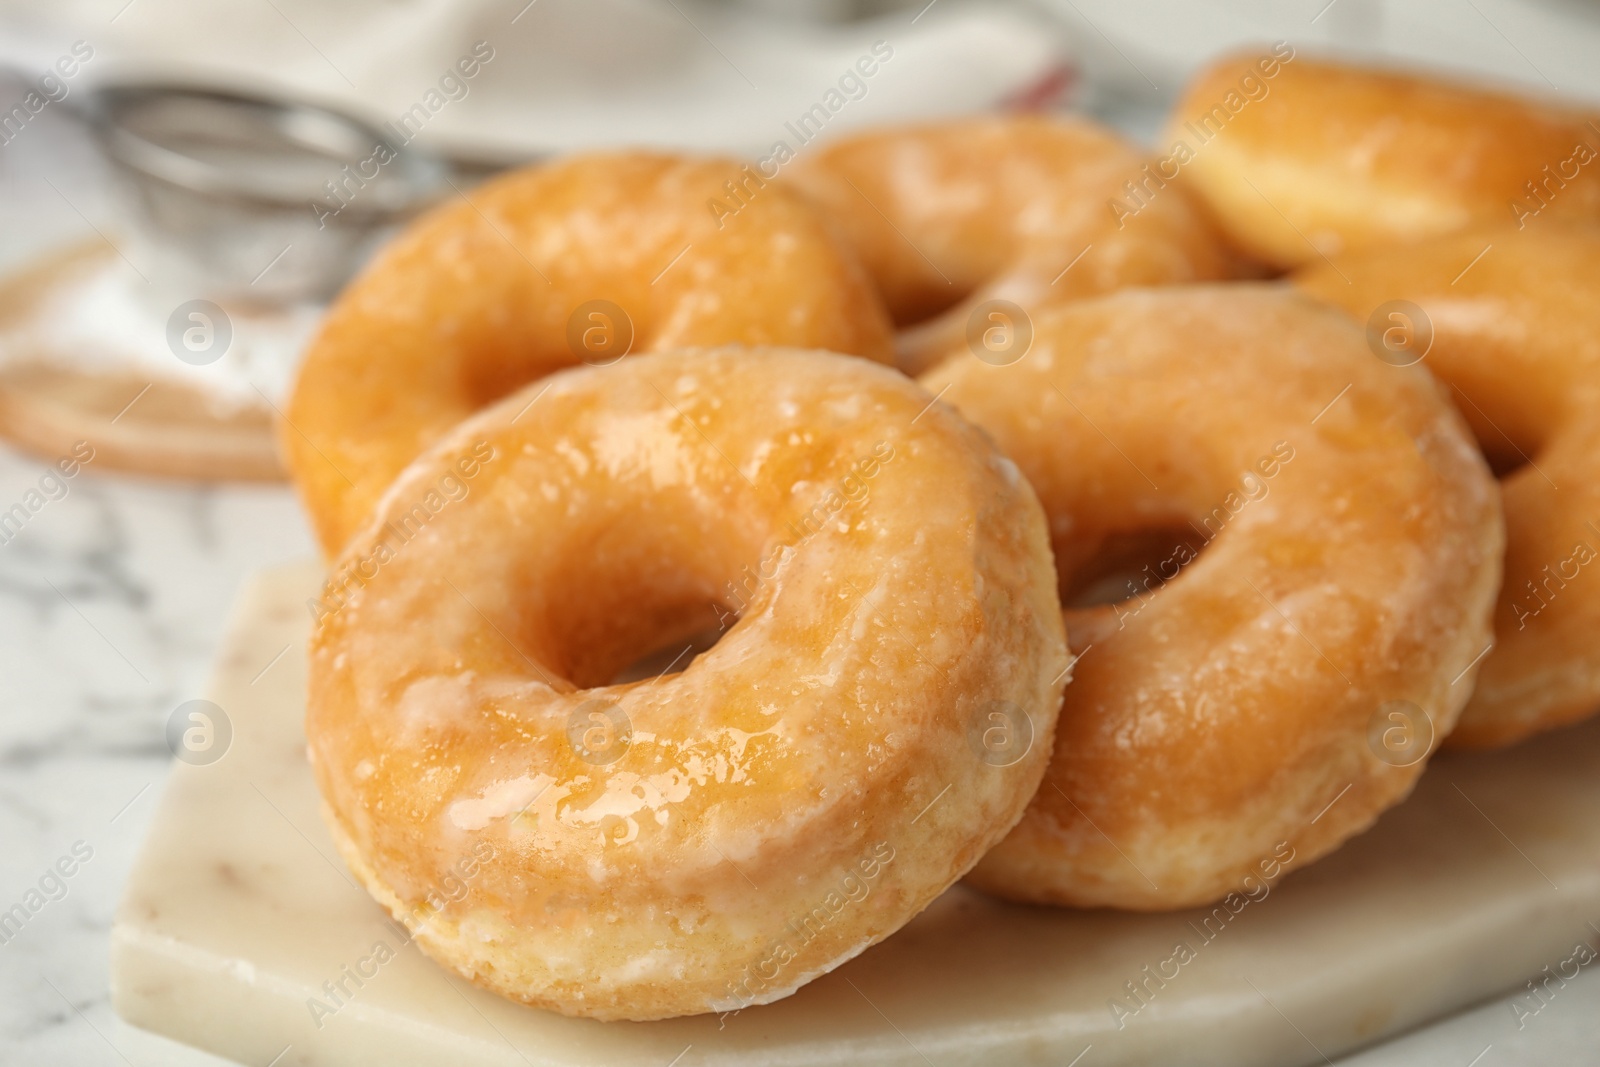 Photo of Sweet delicious glazed donuts on board, closeup